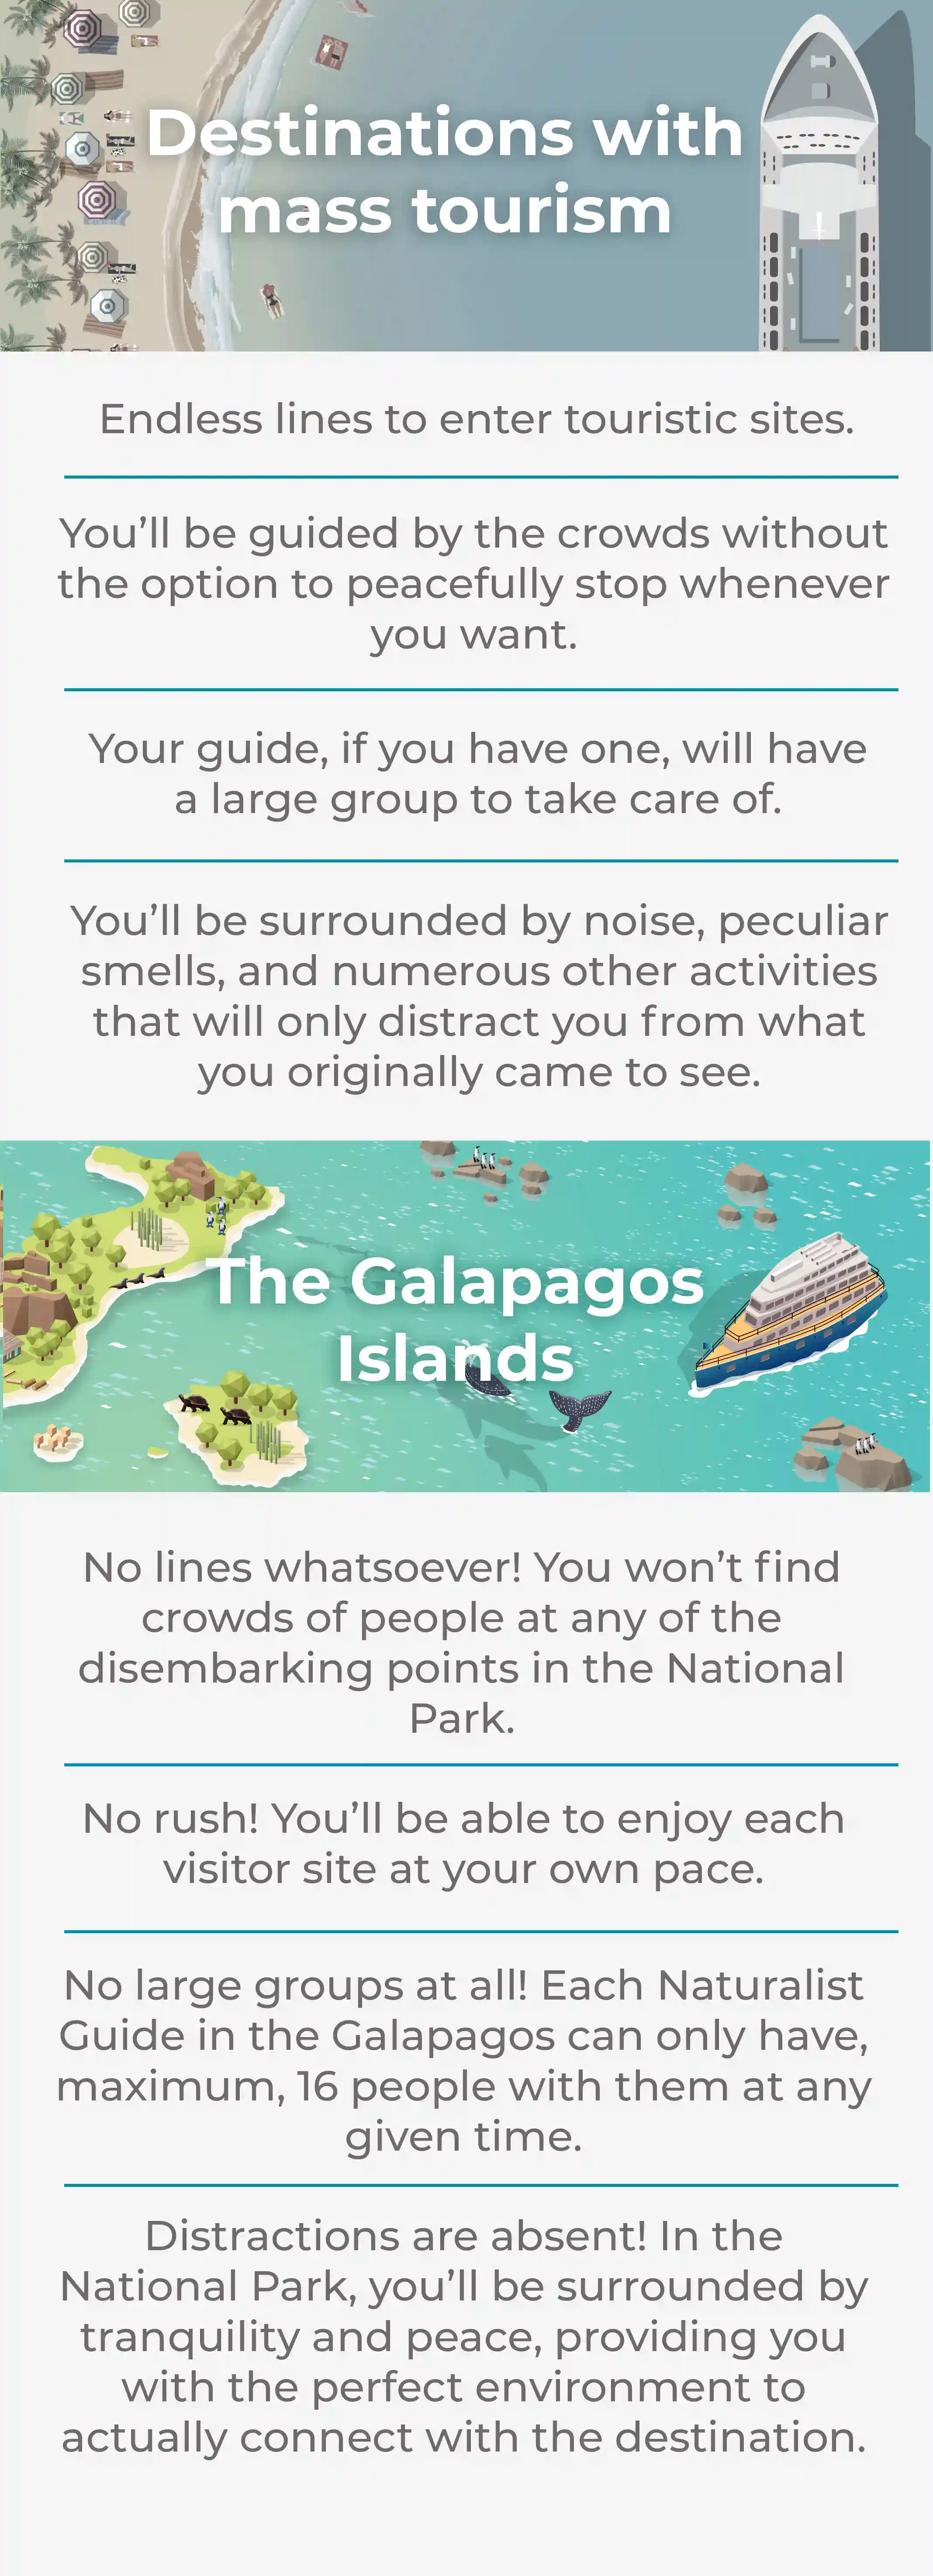 Destinations with mass tourism vs. The Galapagos Islands